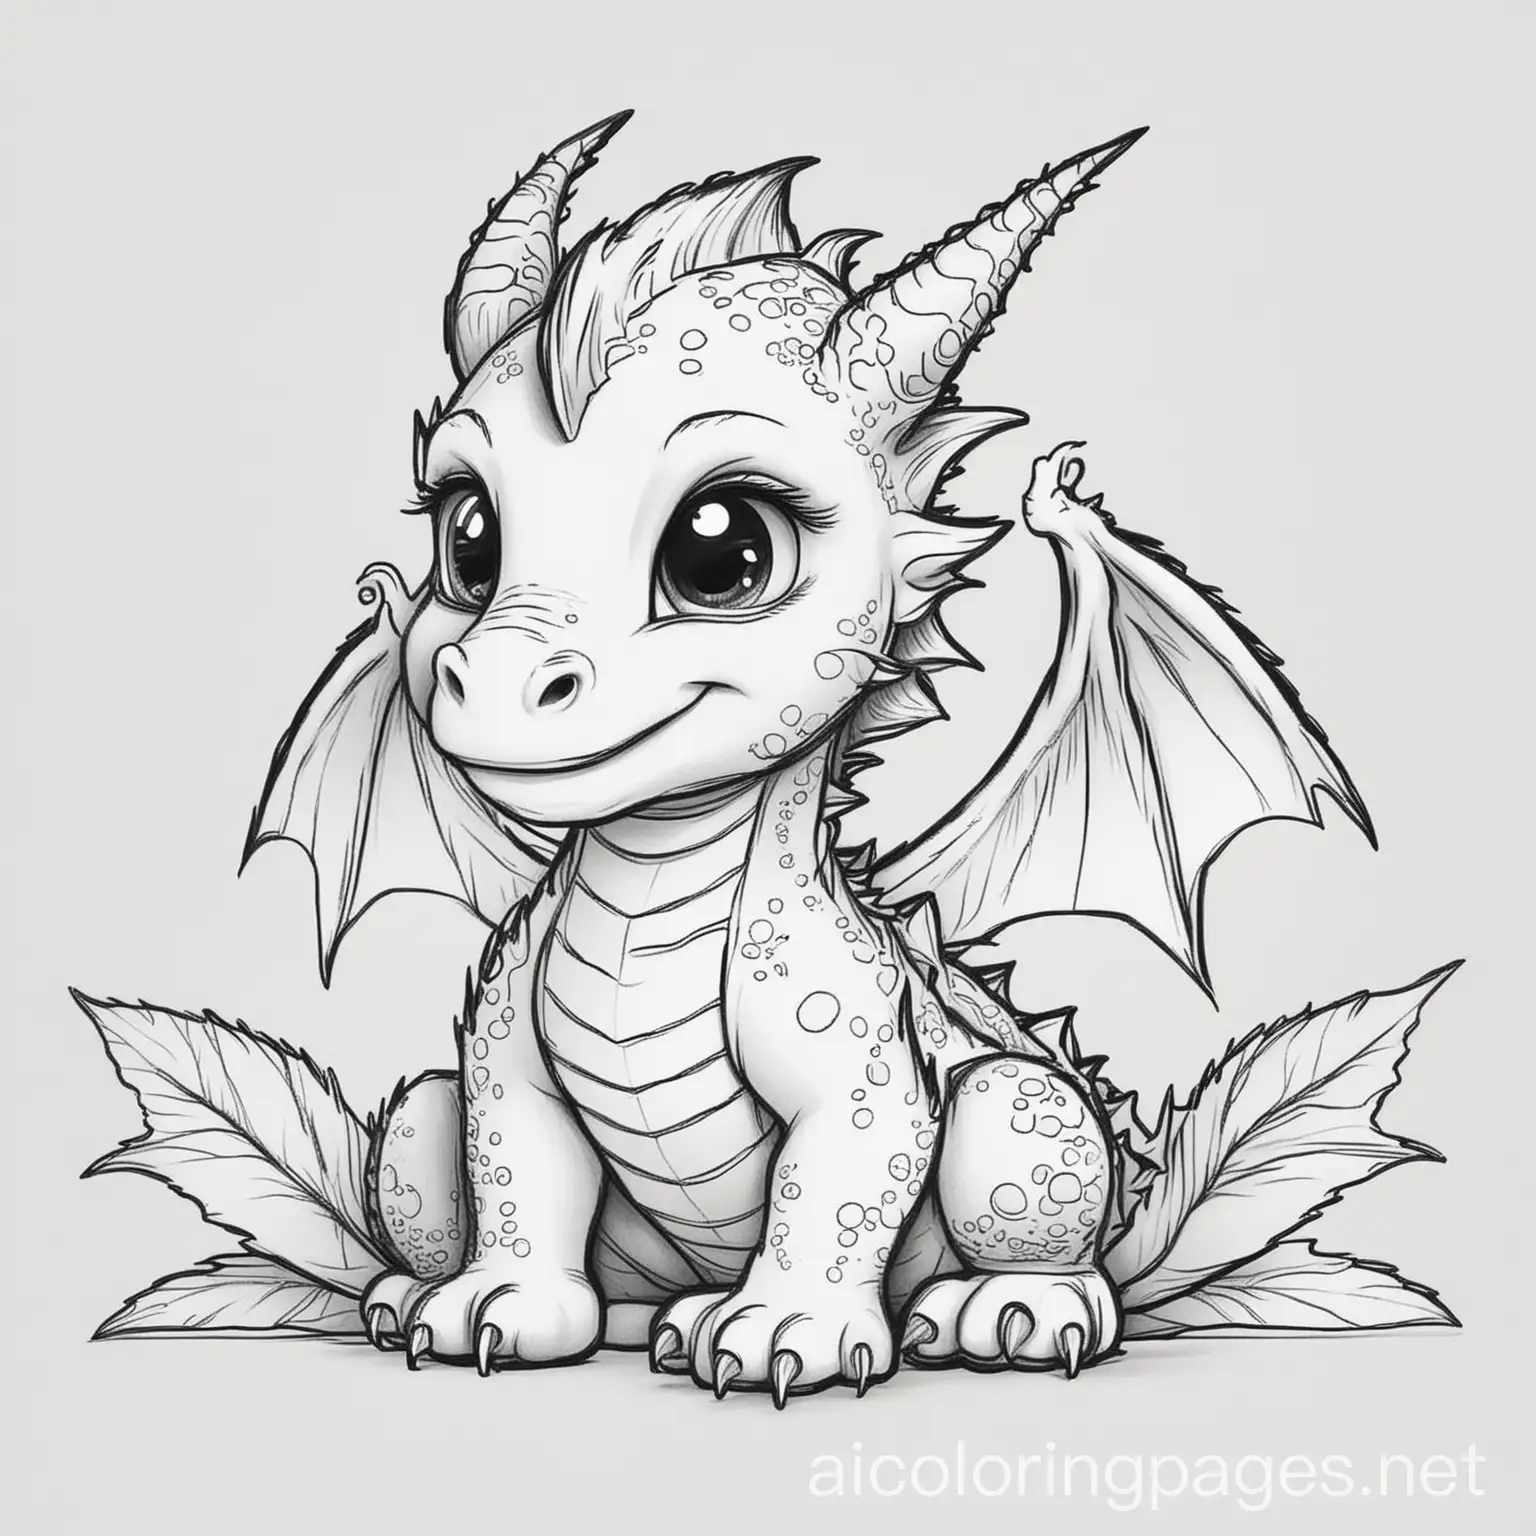 baby dragon theme, Coloring Page, black and white, line art, white background, Simplicity, Ample White Space. The background of the coloring page is plain white to make it easy for young children to color within the lines. The outlines of all the subjects are easy to distinguish, making it simple for kids to color without too much difficulty